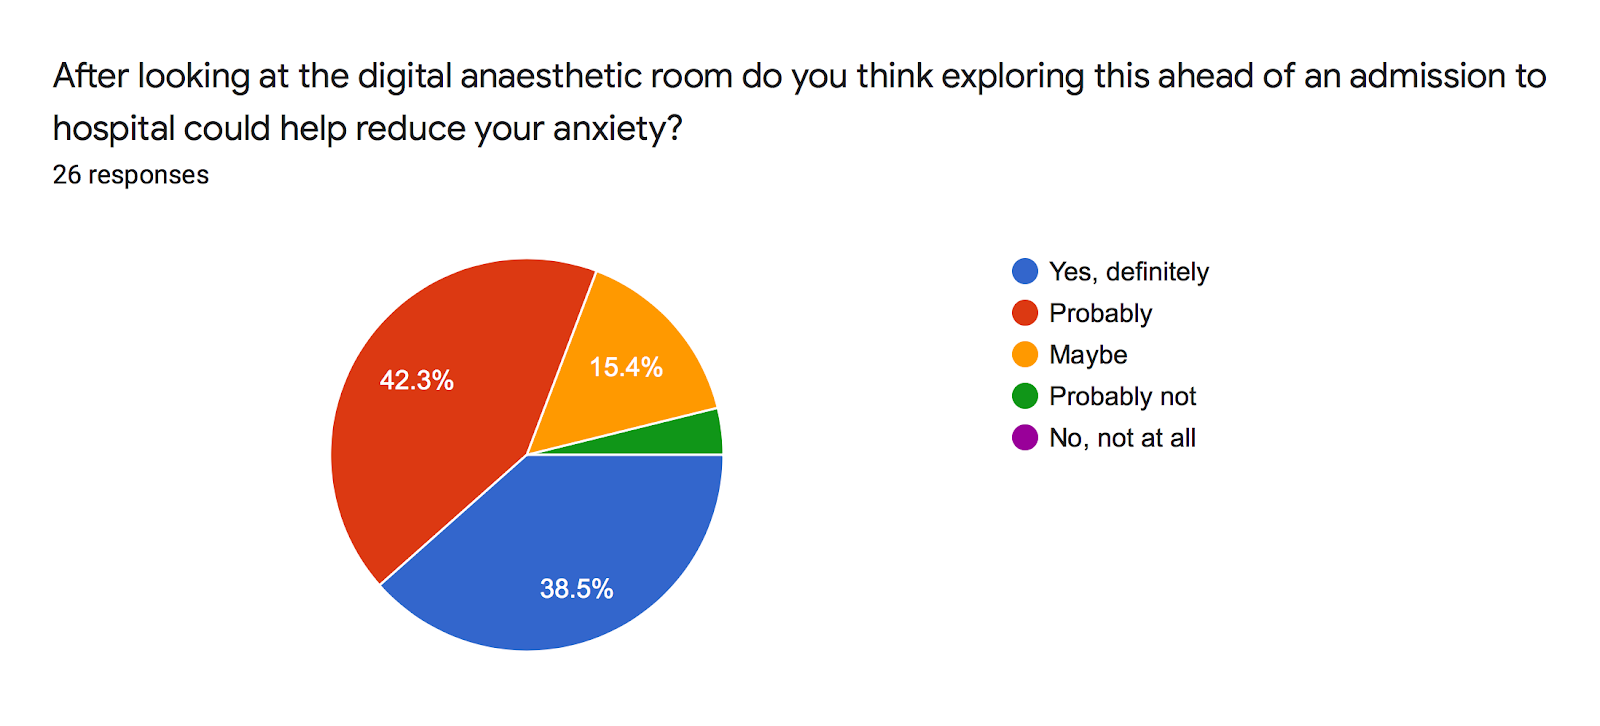 Forms response chart. Question title: After looking at the digital anaesthetic room do you think exploring this ahead of an admission to hospital could help reduce your anxiety?. Number of responses: 26 responses.